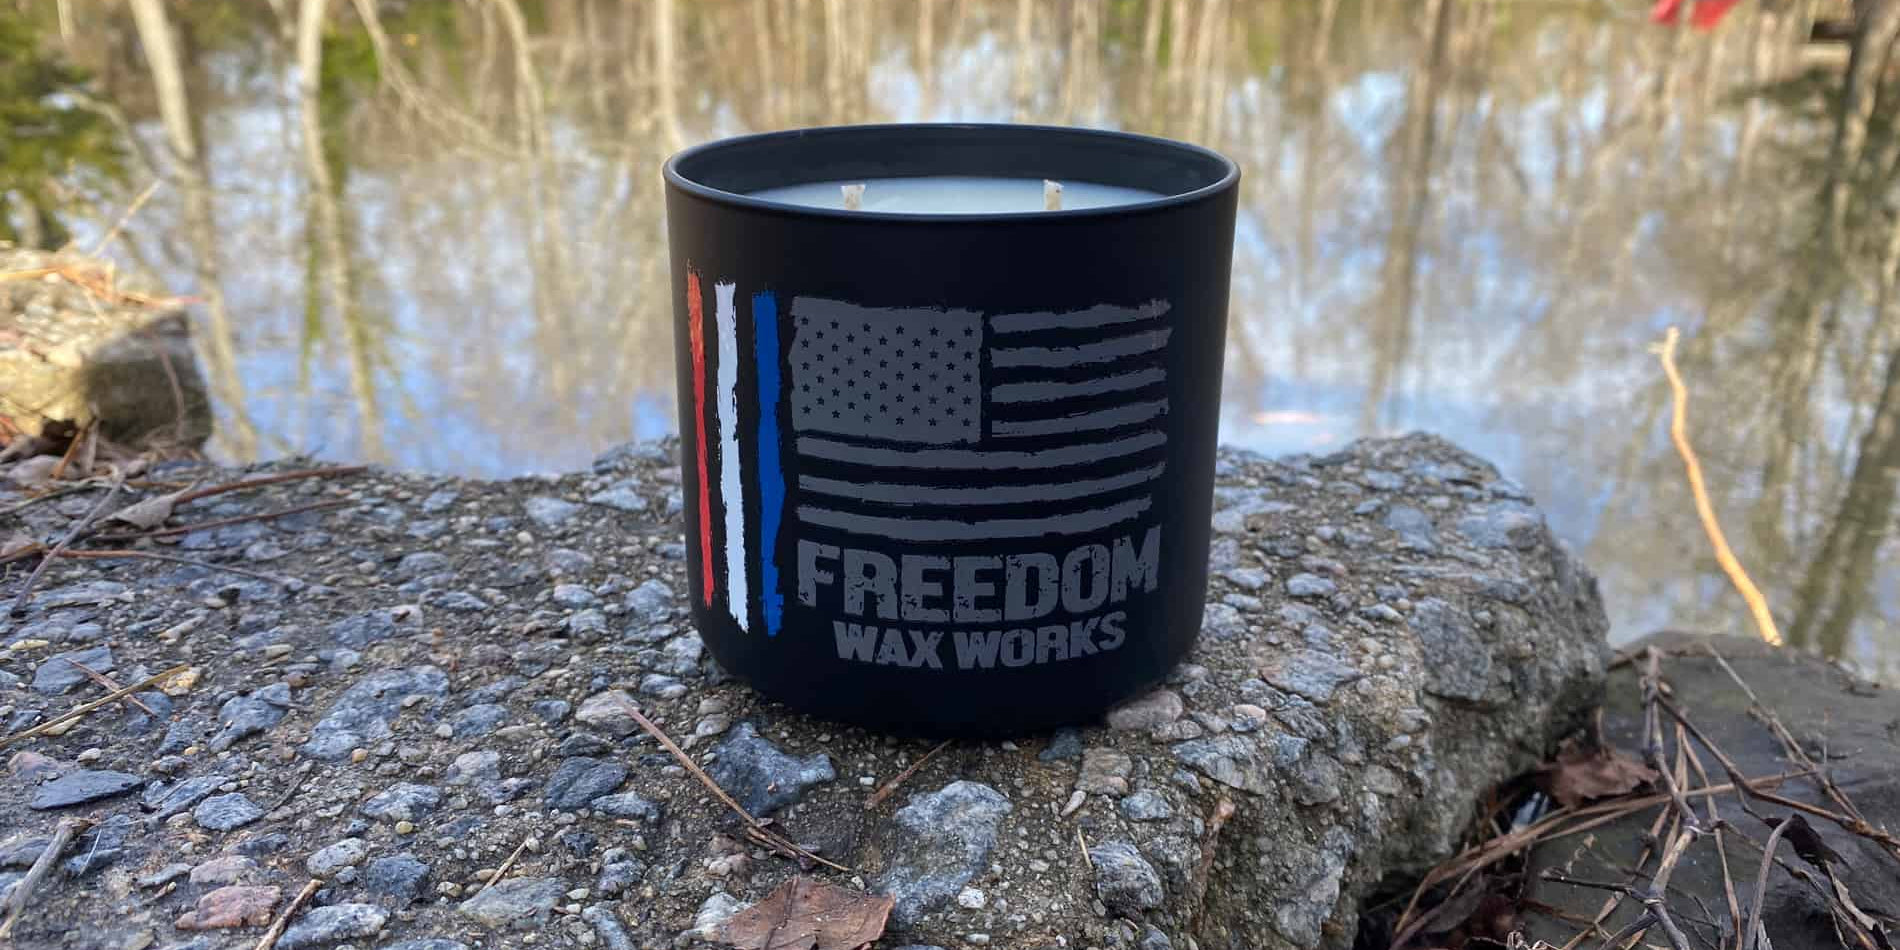 Freedom wax works candles